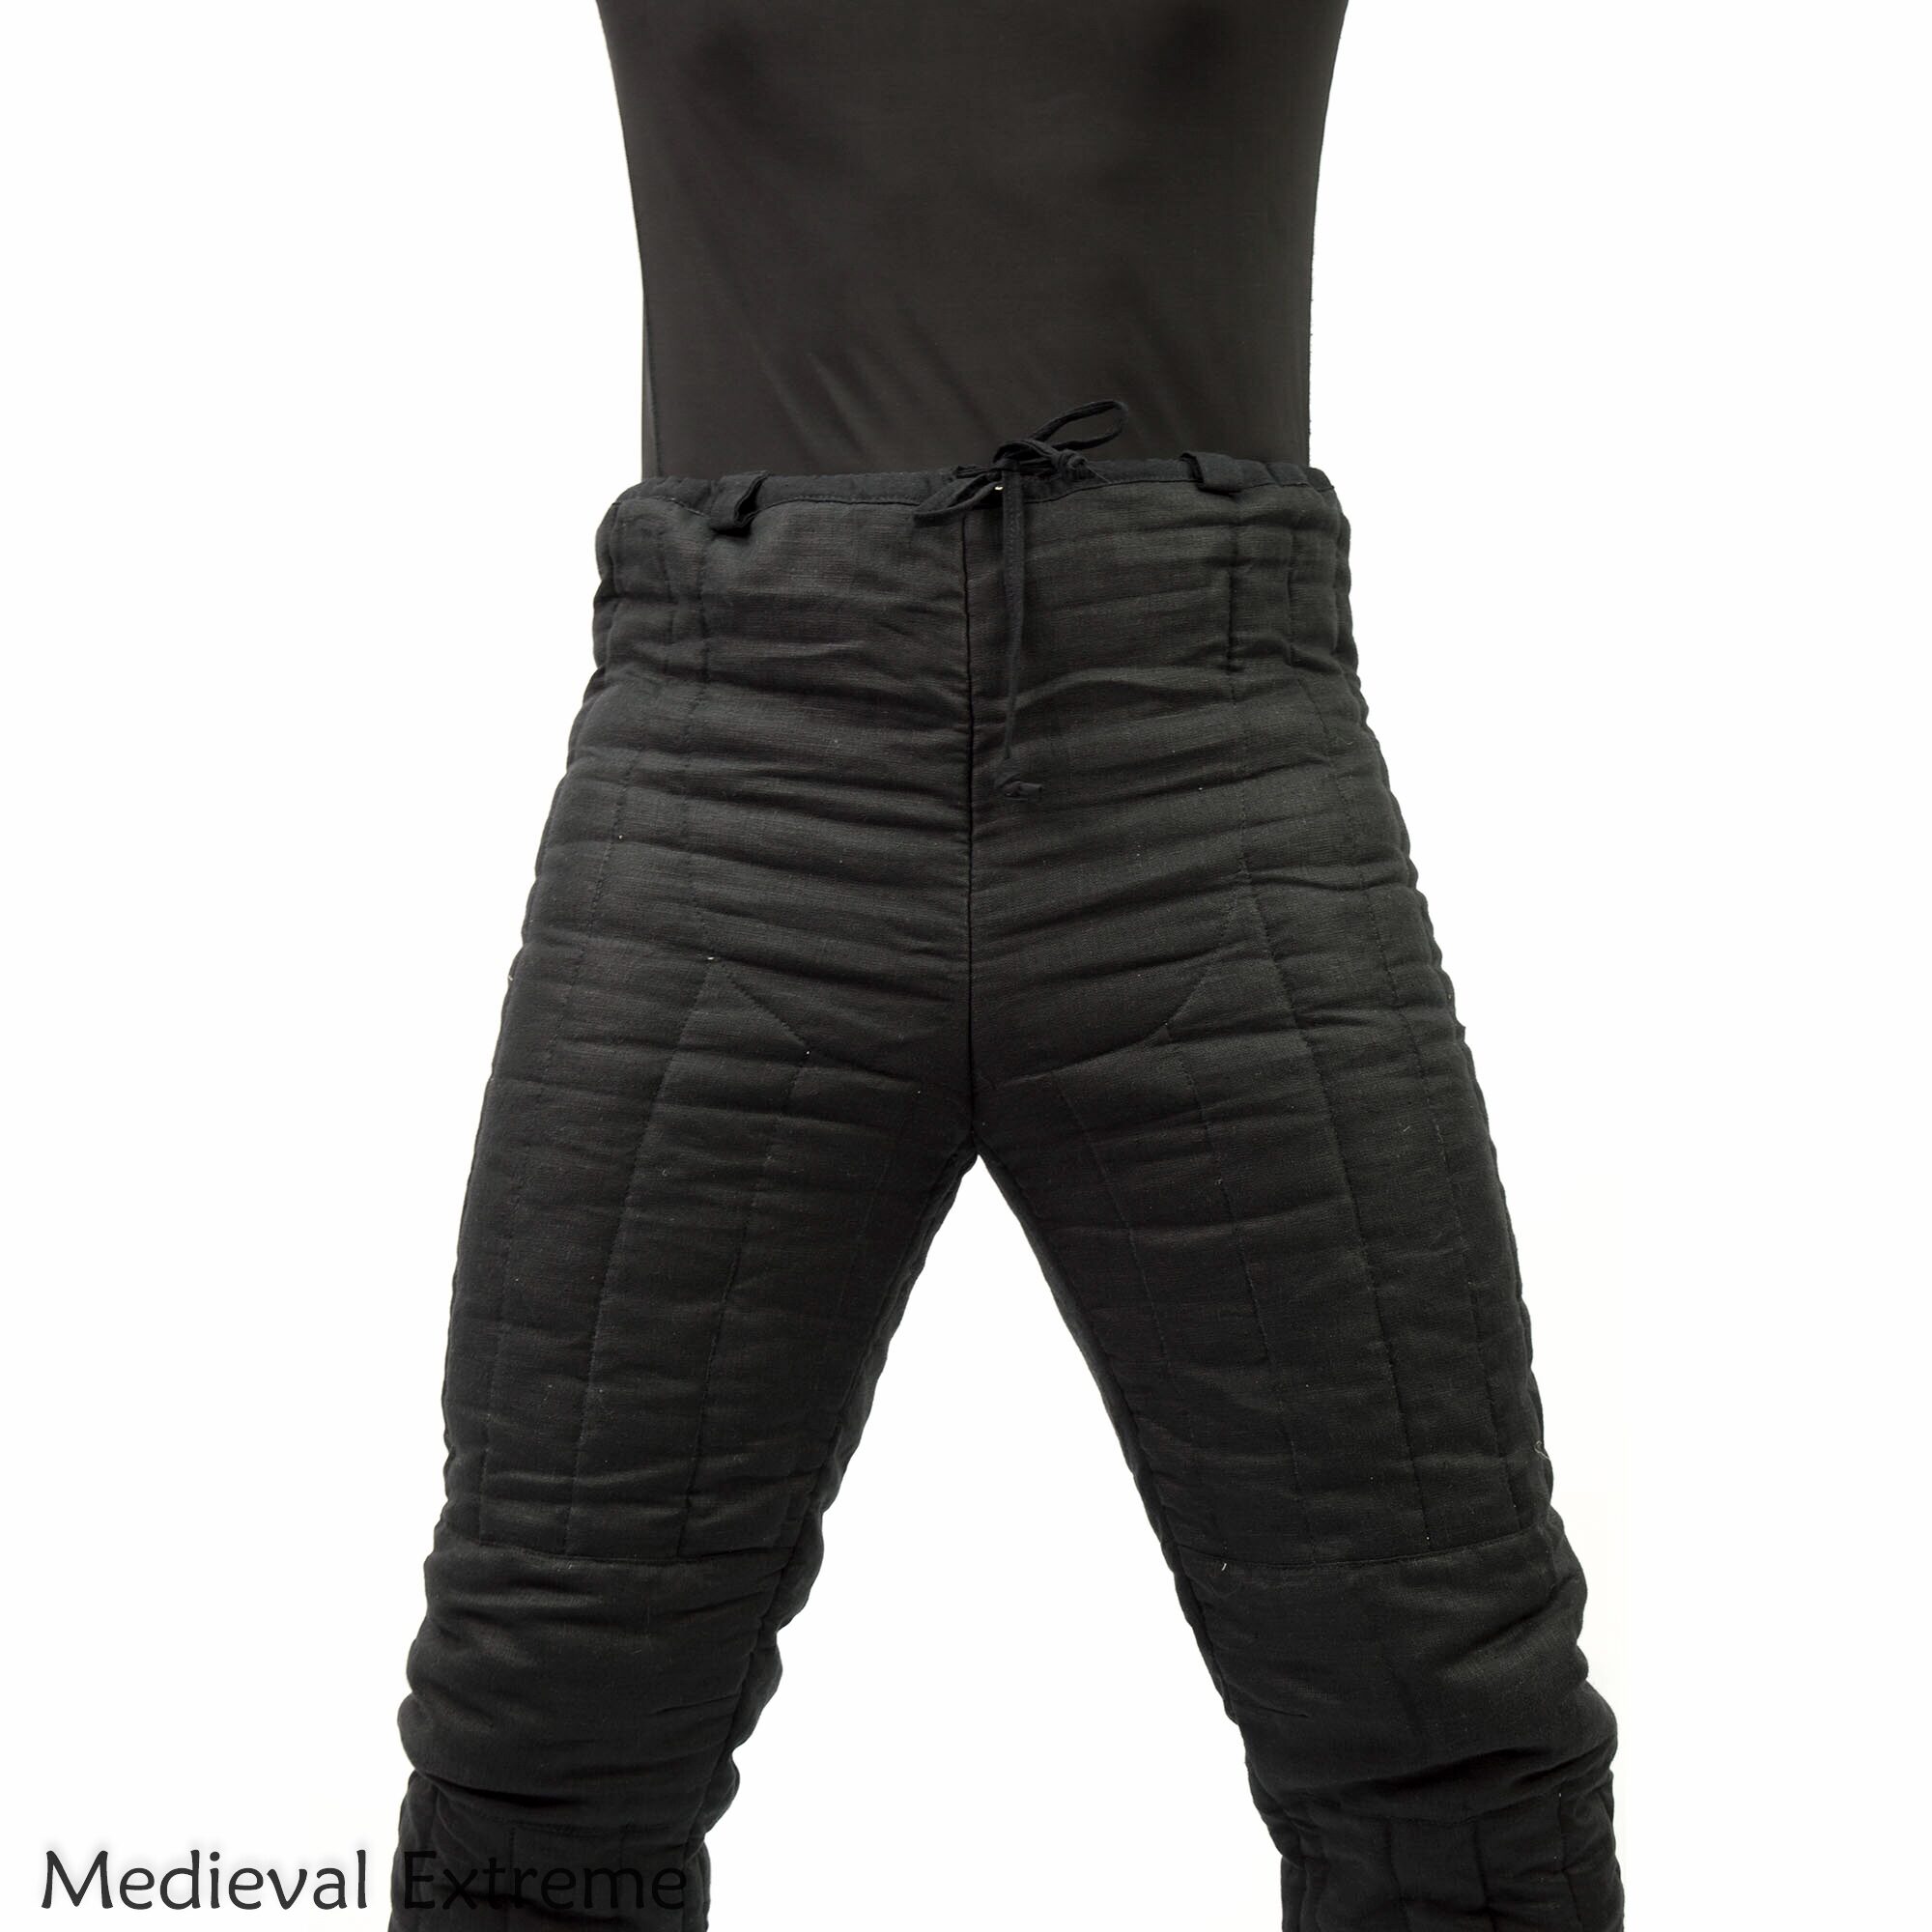 Padded pants for armored combat • Medieval Extreme